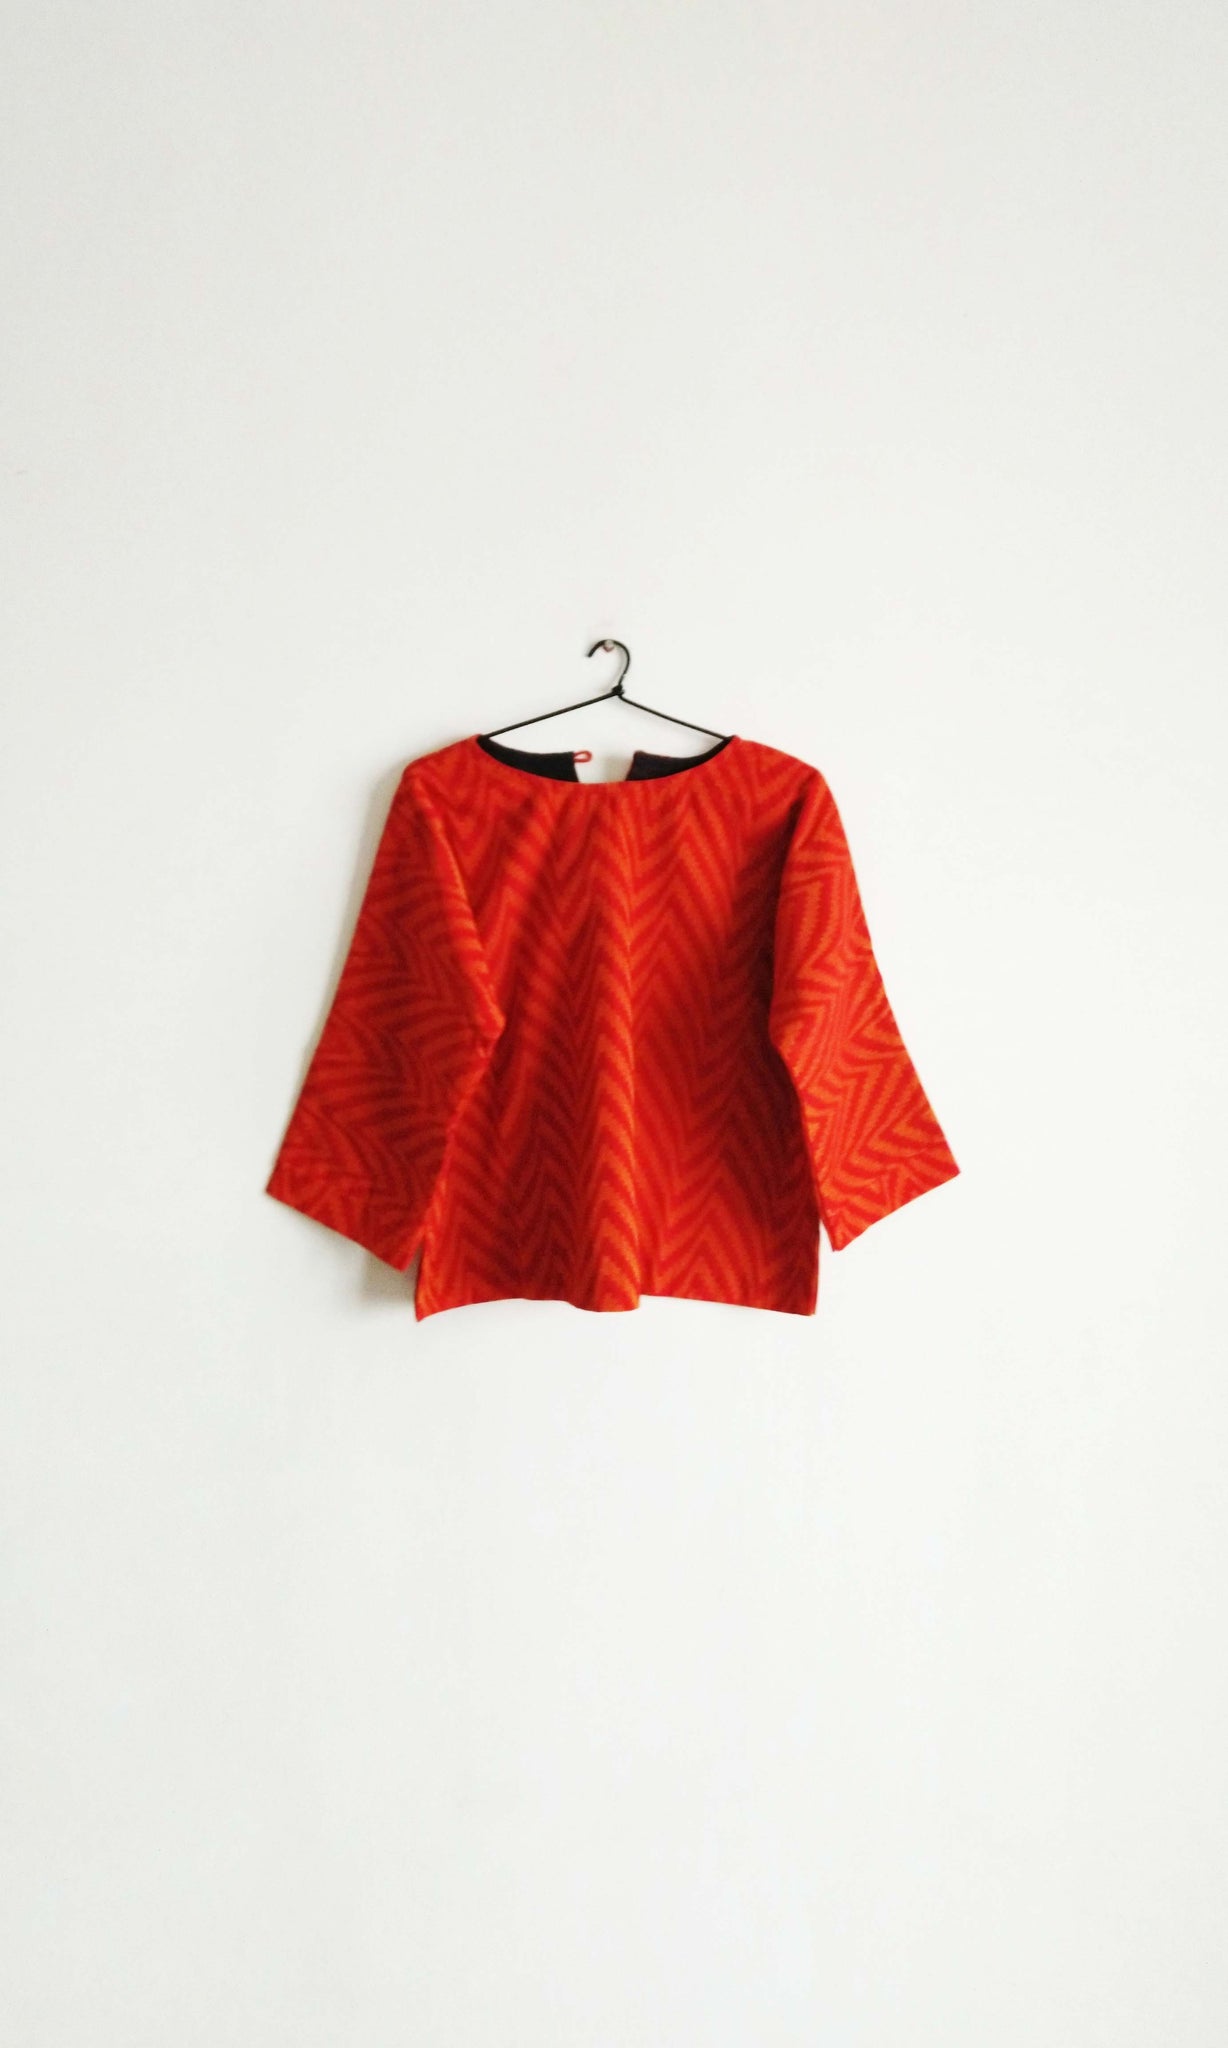 u89 Hand Woven Soft Cotton Blouse | Relaxed Fit | Free Size | Ready To Ship